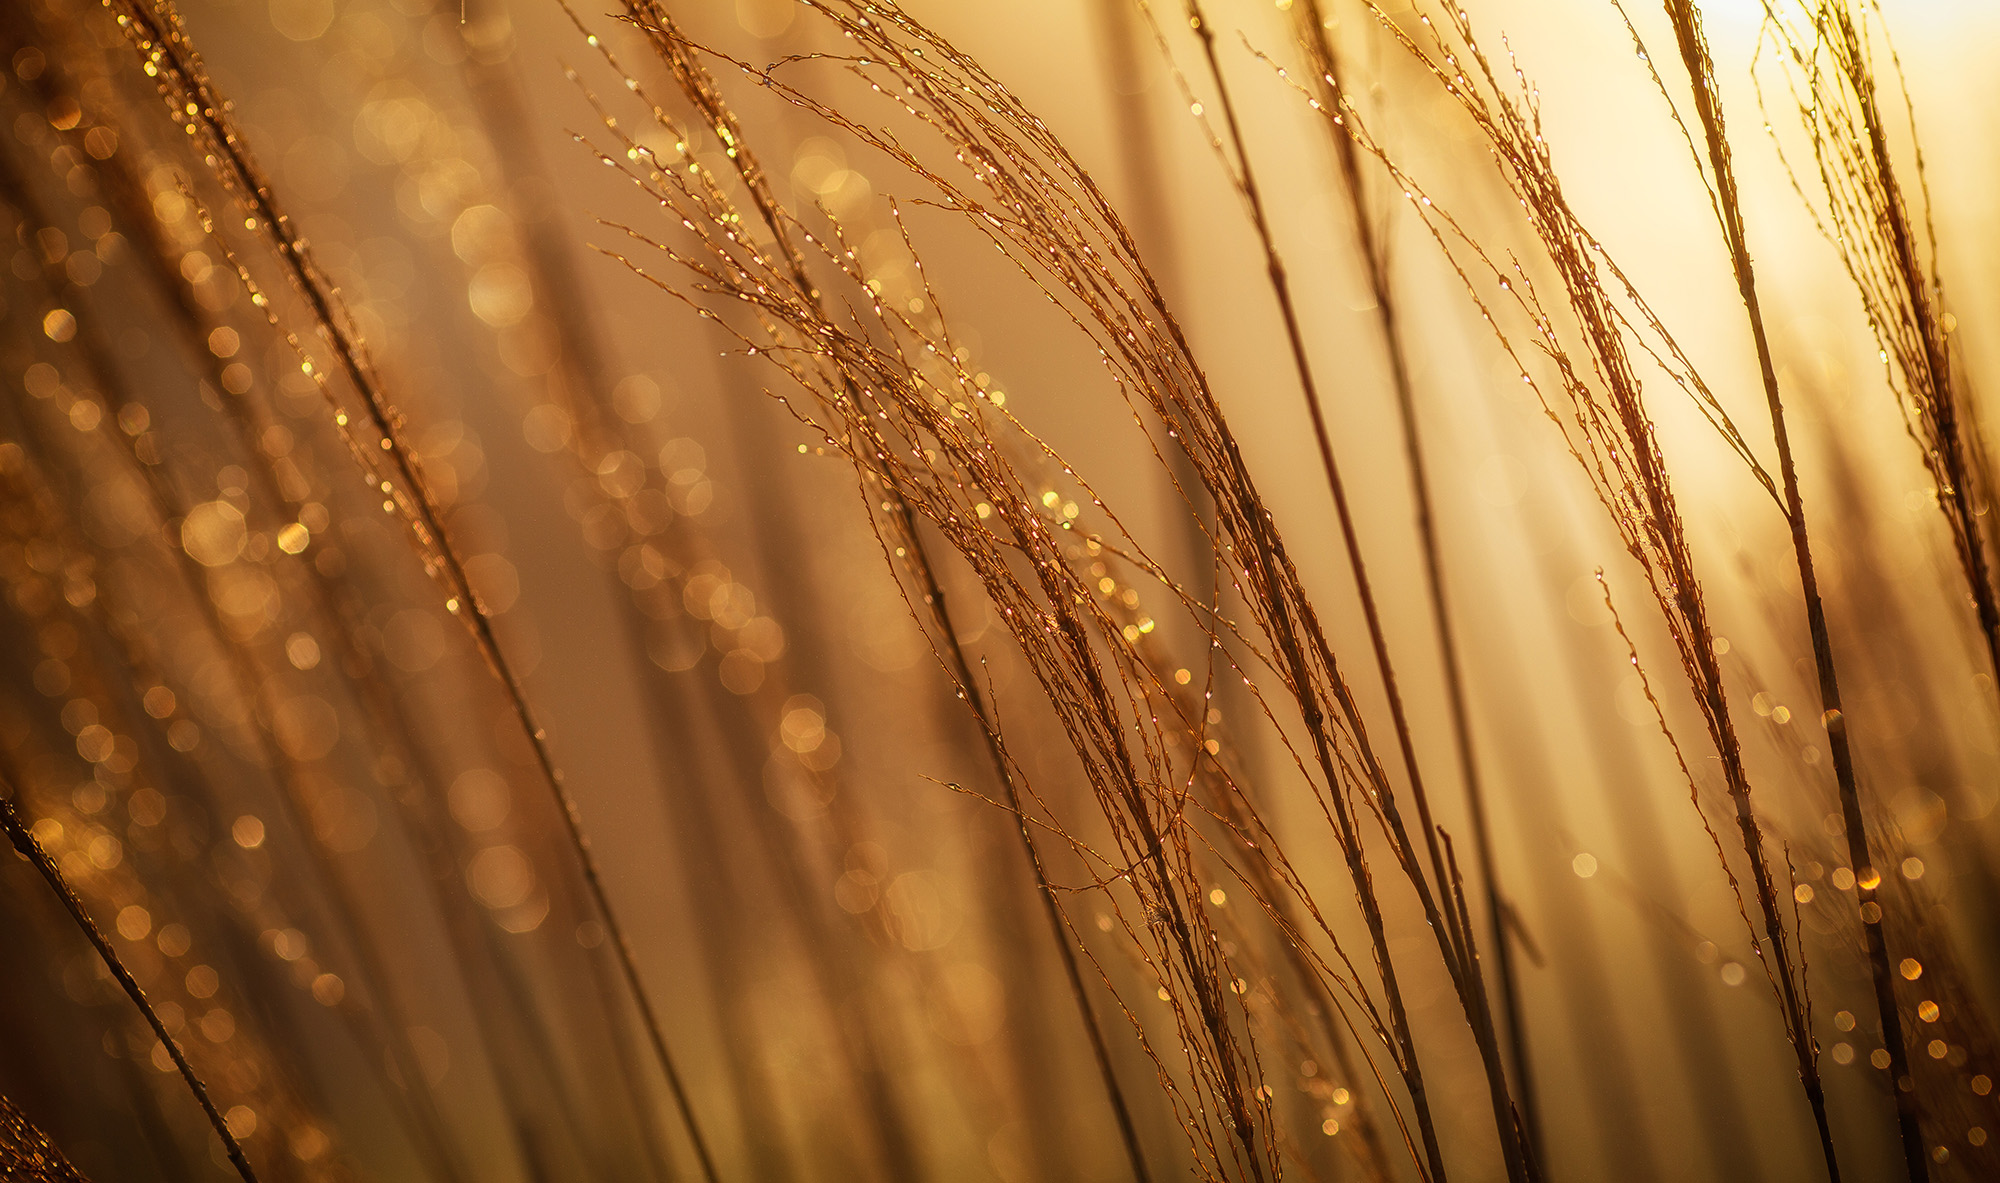 Golden grass with water droplets